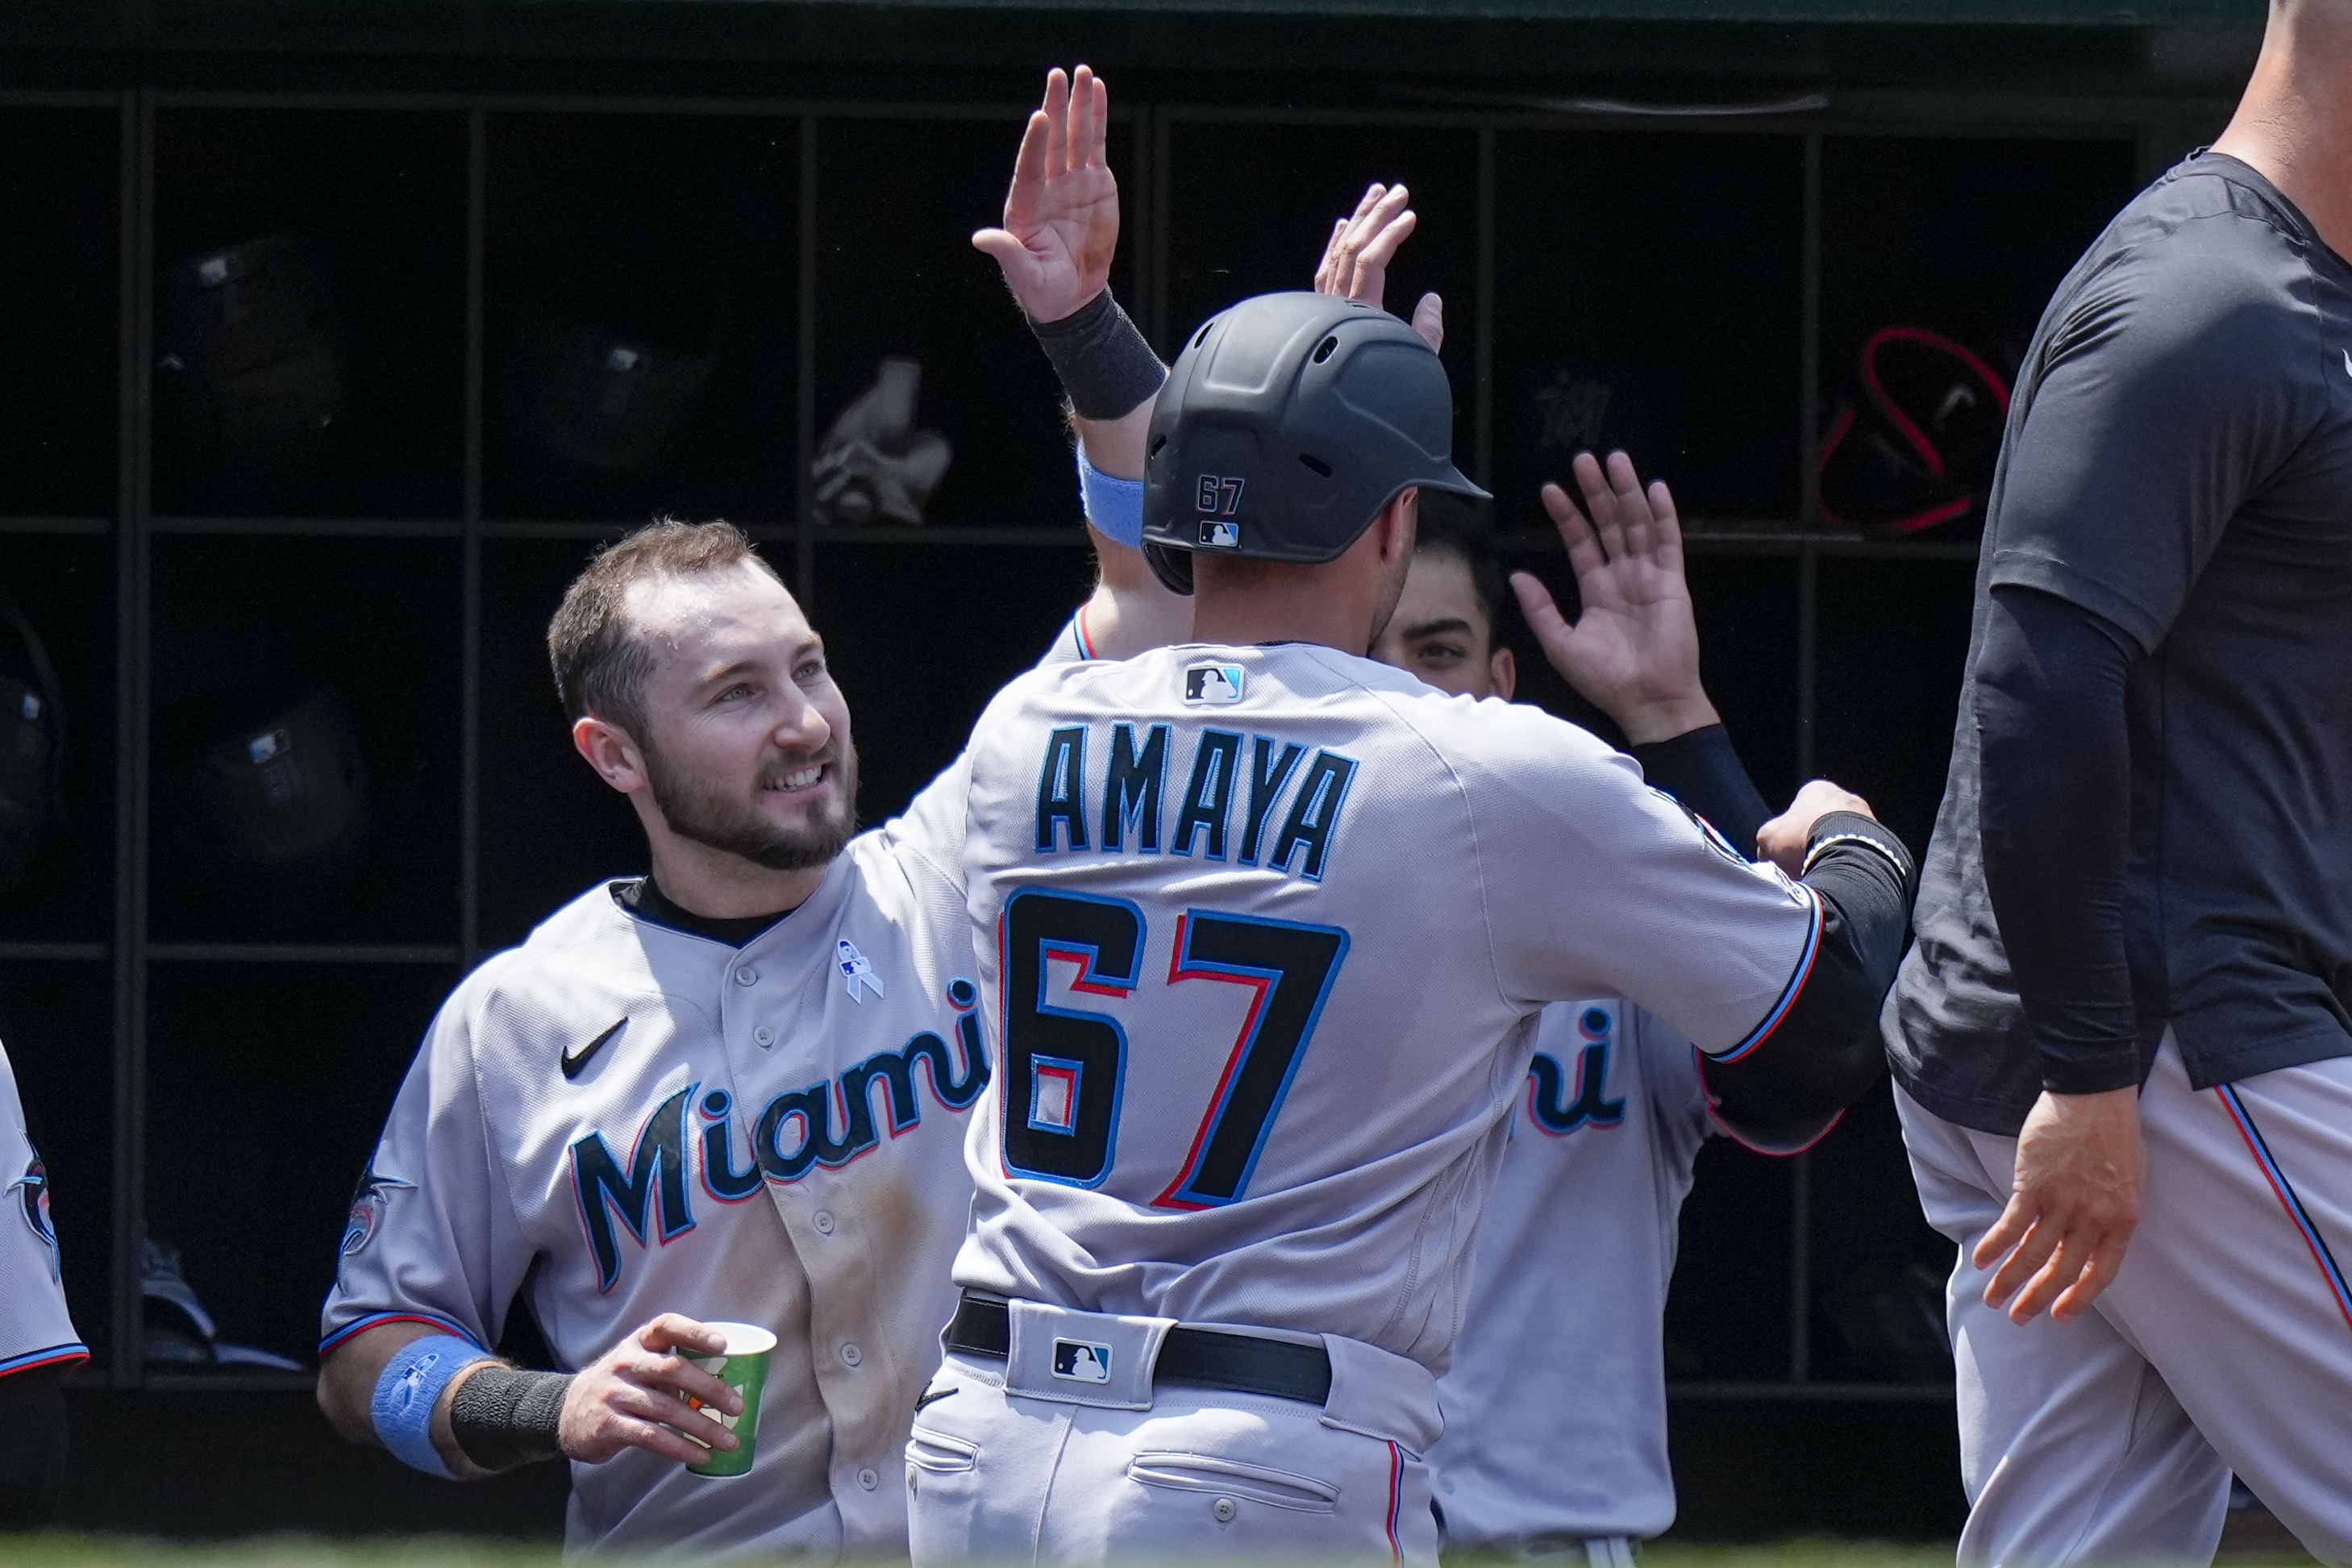 Piazza's 8 Days, 5 Games With Marlins Leads To Decades-Long Obsession